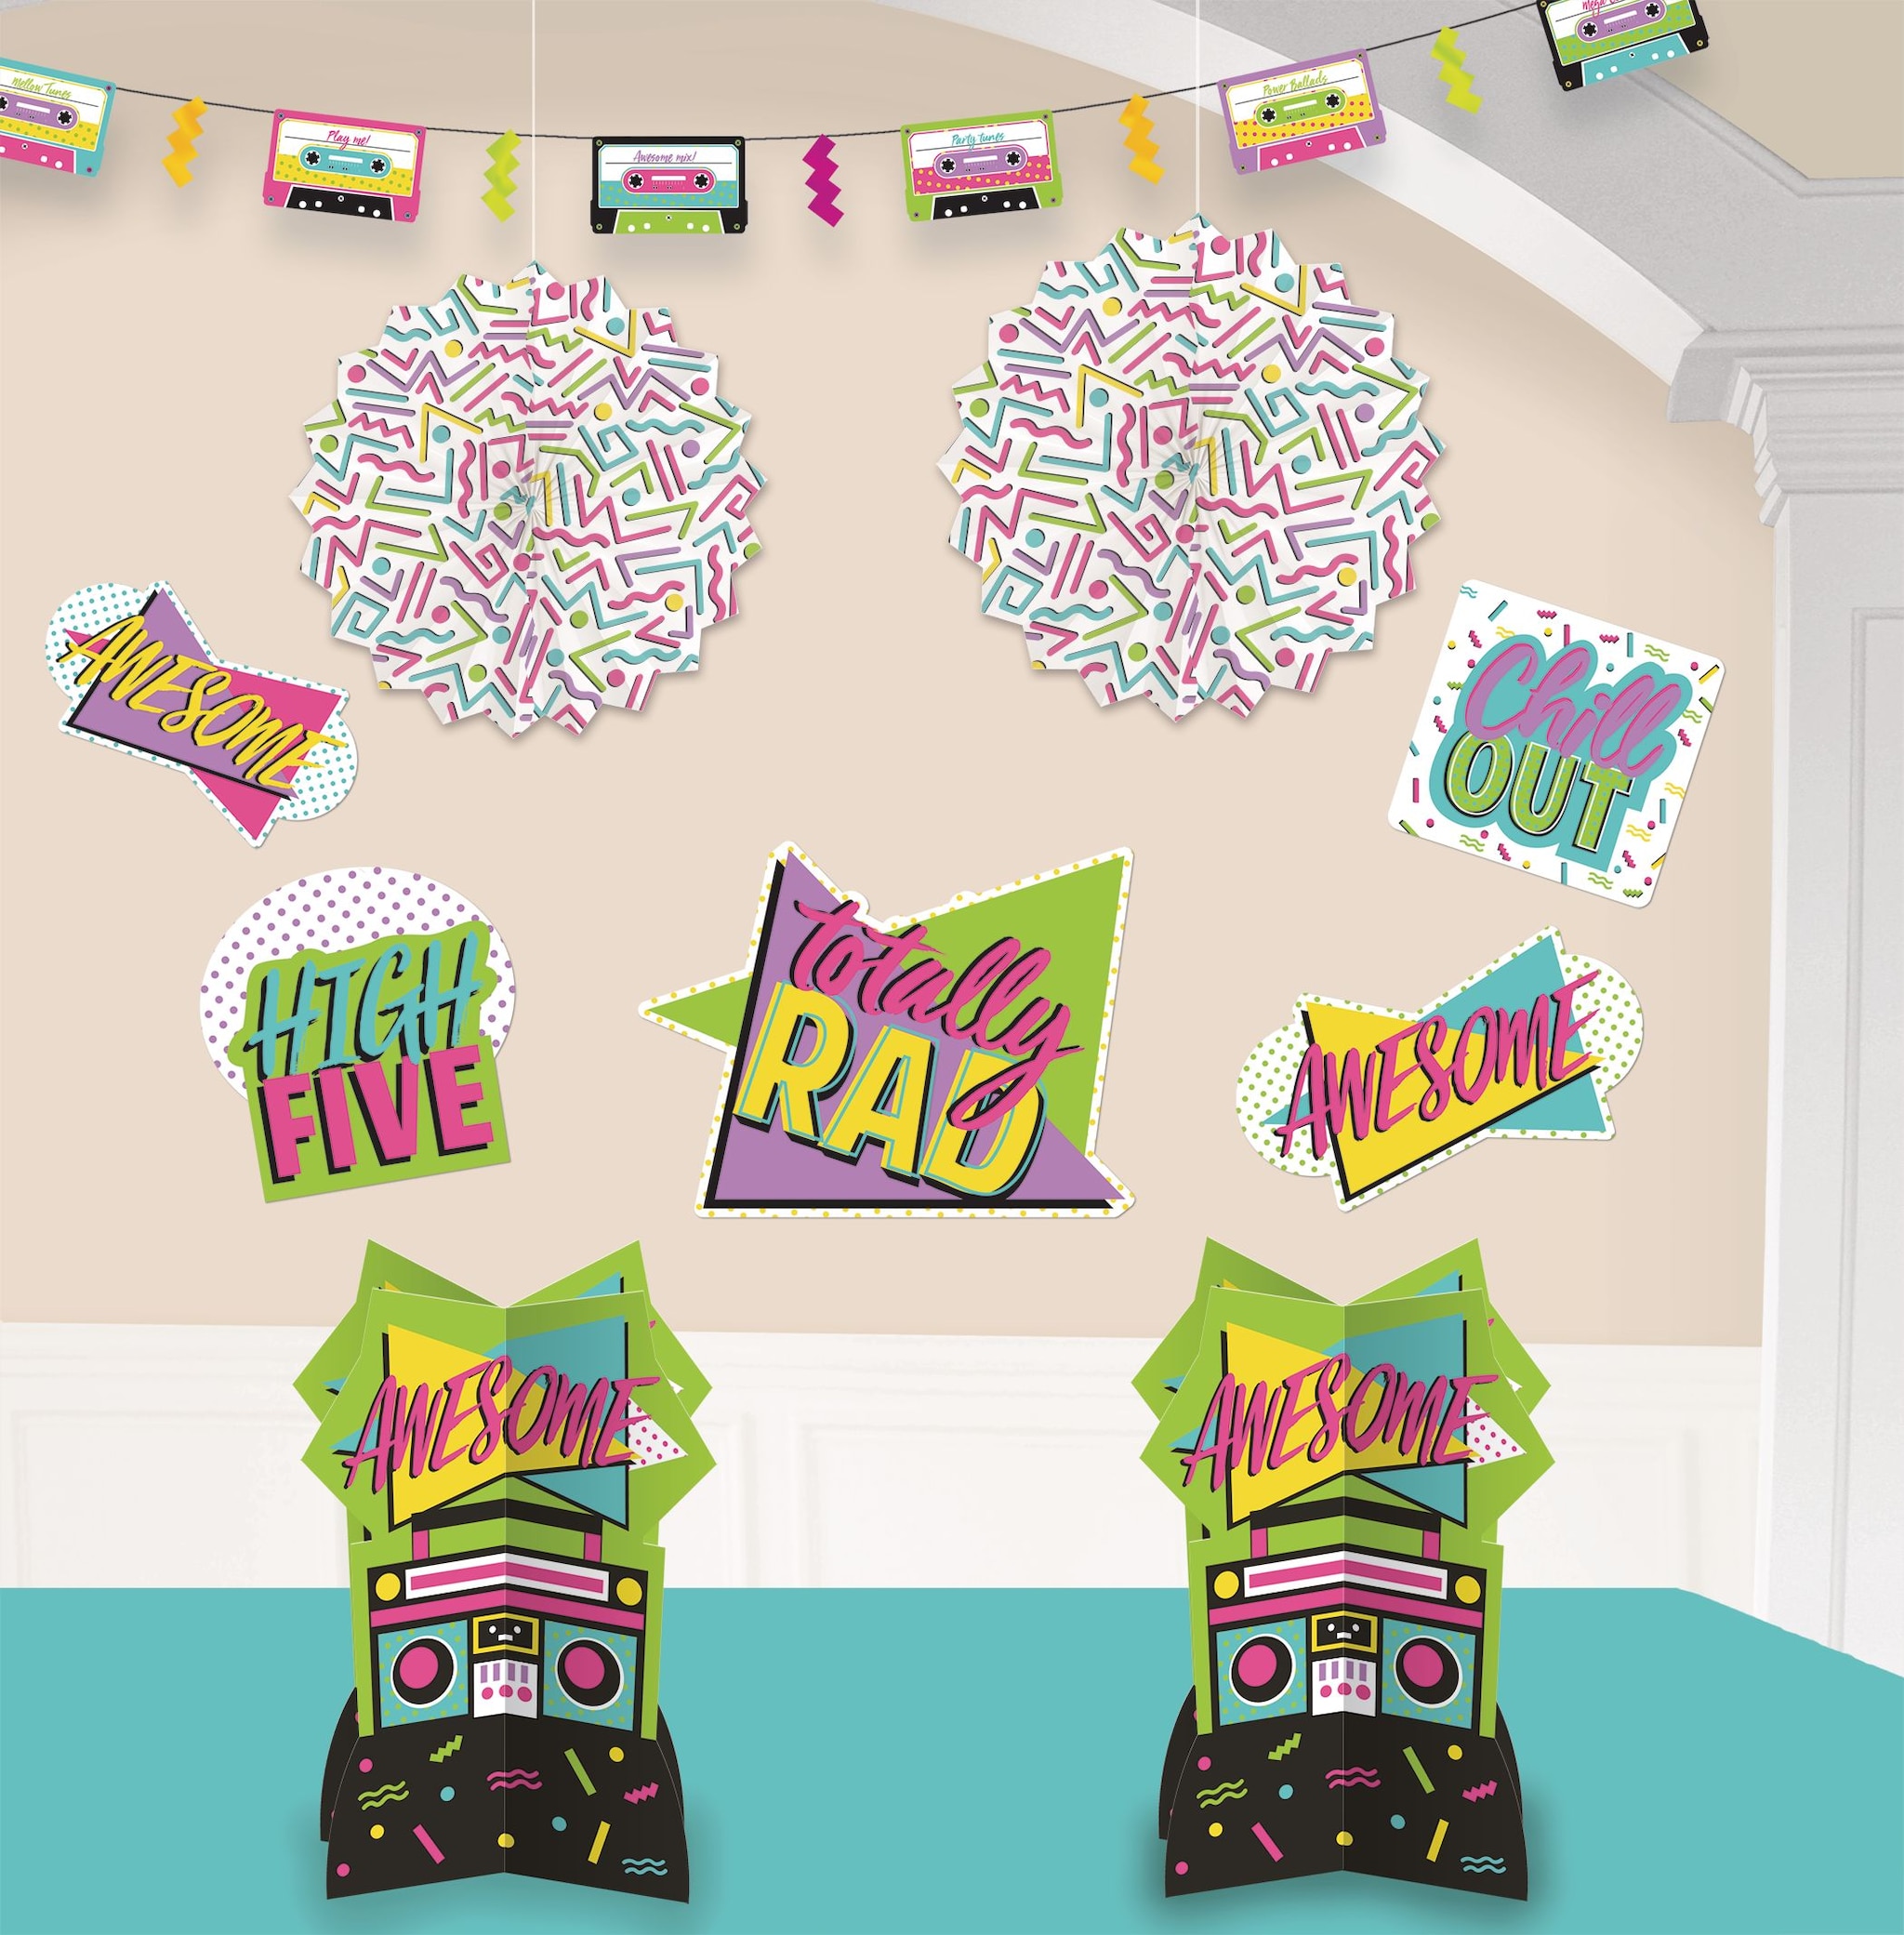 Awesome 80s Room Decorating Kit, 10-pc | Party City